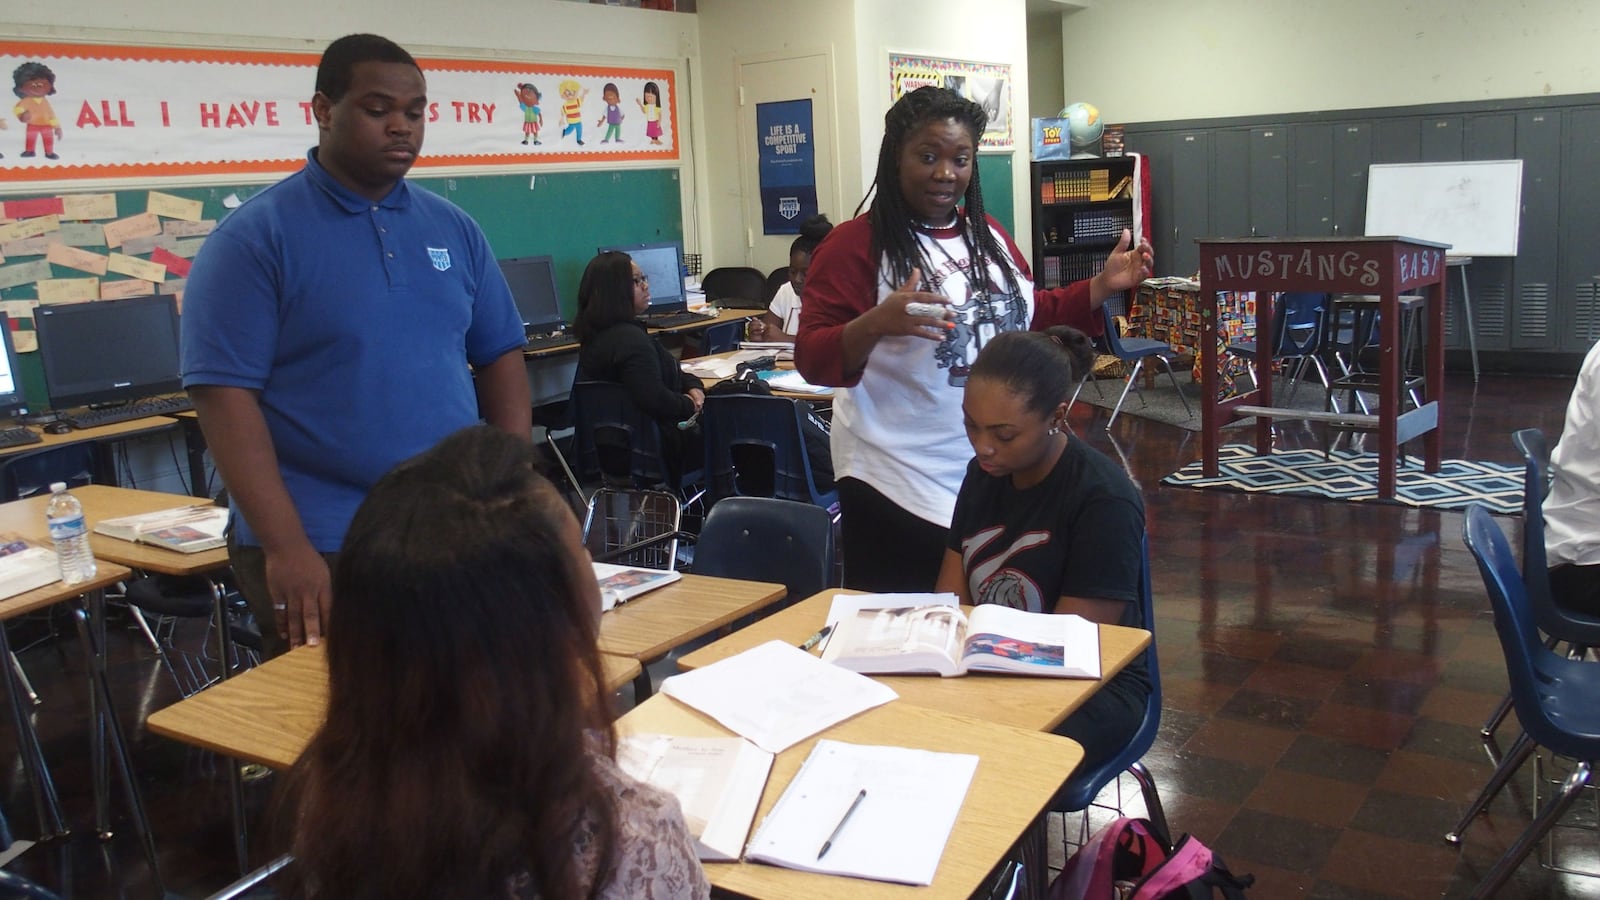 Teacher Meah King (center) introduces curriculum to her students on Monday on the first day of class at East High School in Memphis.